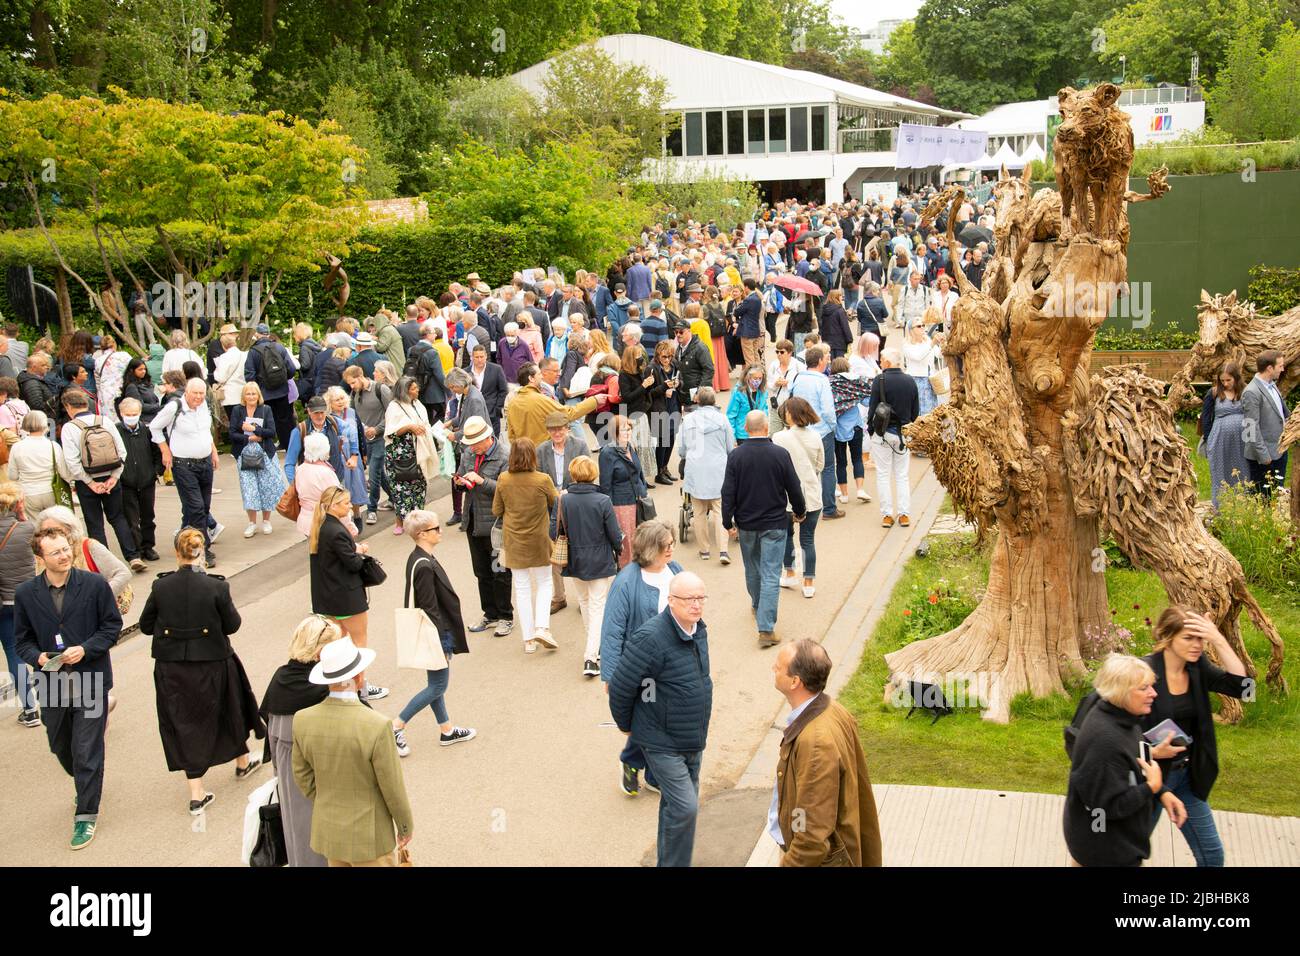 A large wood sculpture surrounded by visitors in an aerial view of the grounds of the Chelsea Flower Show Stock Photo